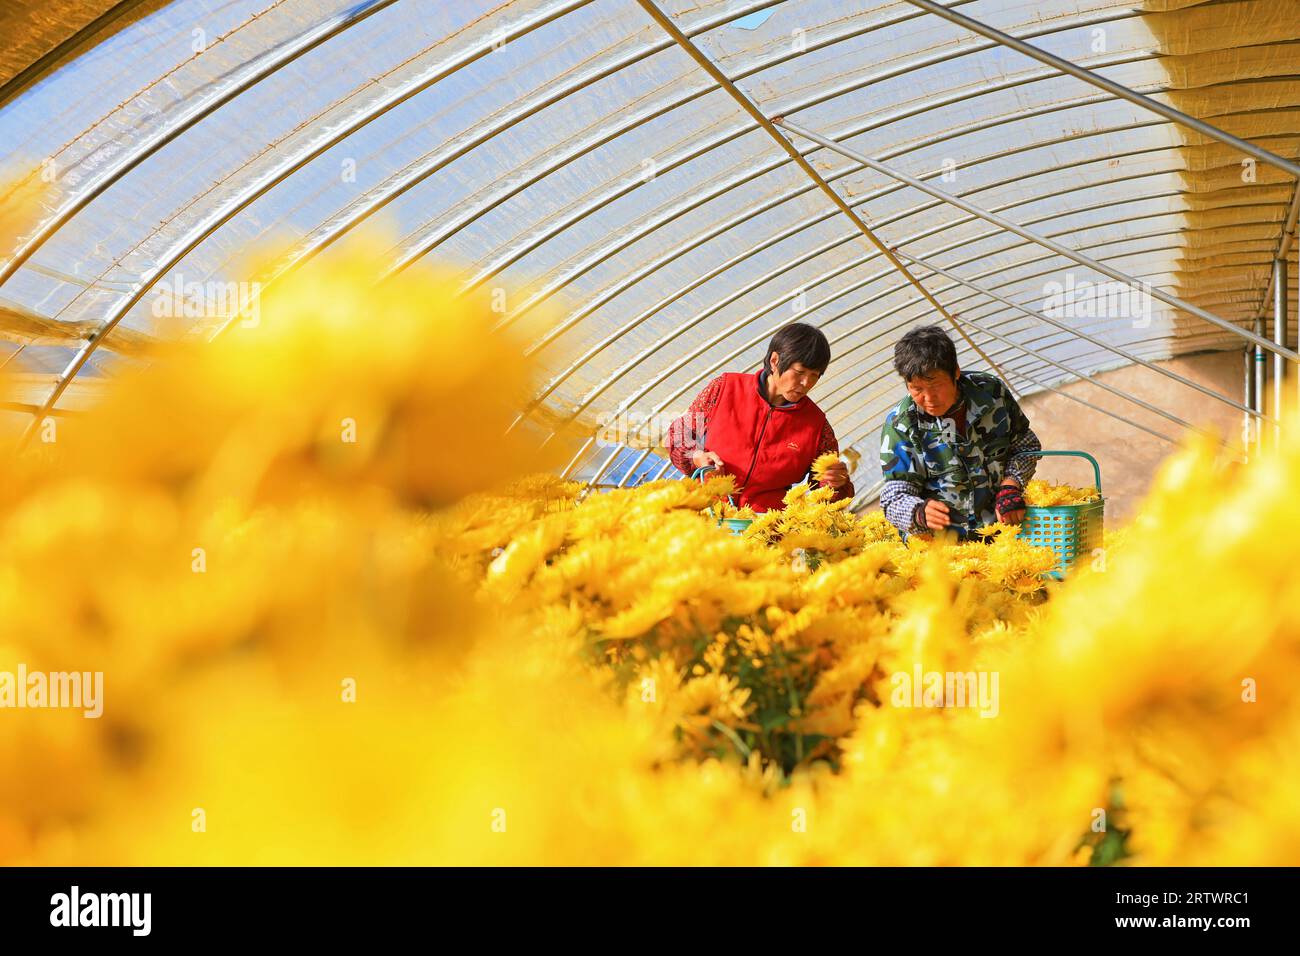 LUANNAN COUNTY, China - November 12, 2021: growers collect golden chrysanthemum flowers in a greenhouse, North China Stock Photo